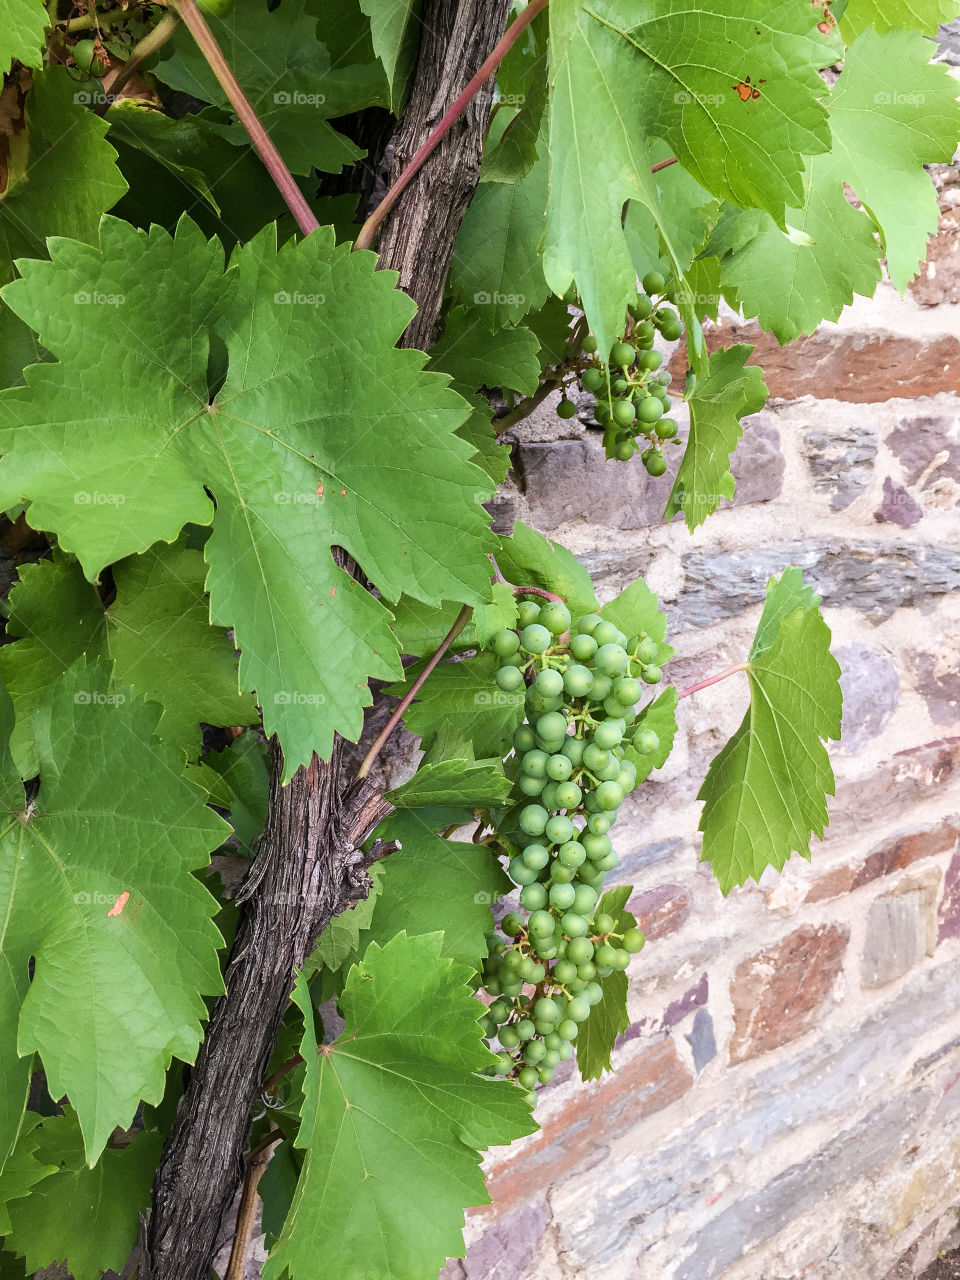 Vine plant with green leaves and unripe riesling grapes in clusters growing against a stone wall in Germany in the summer.